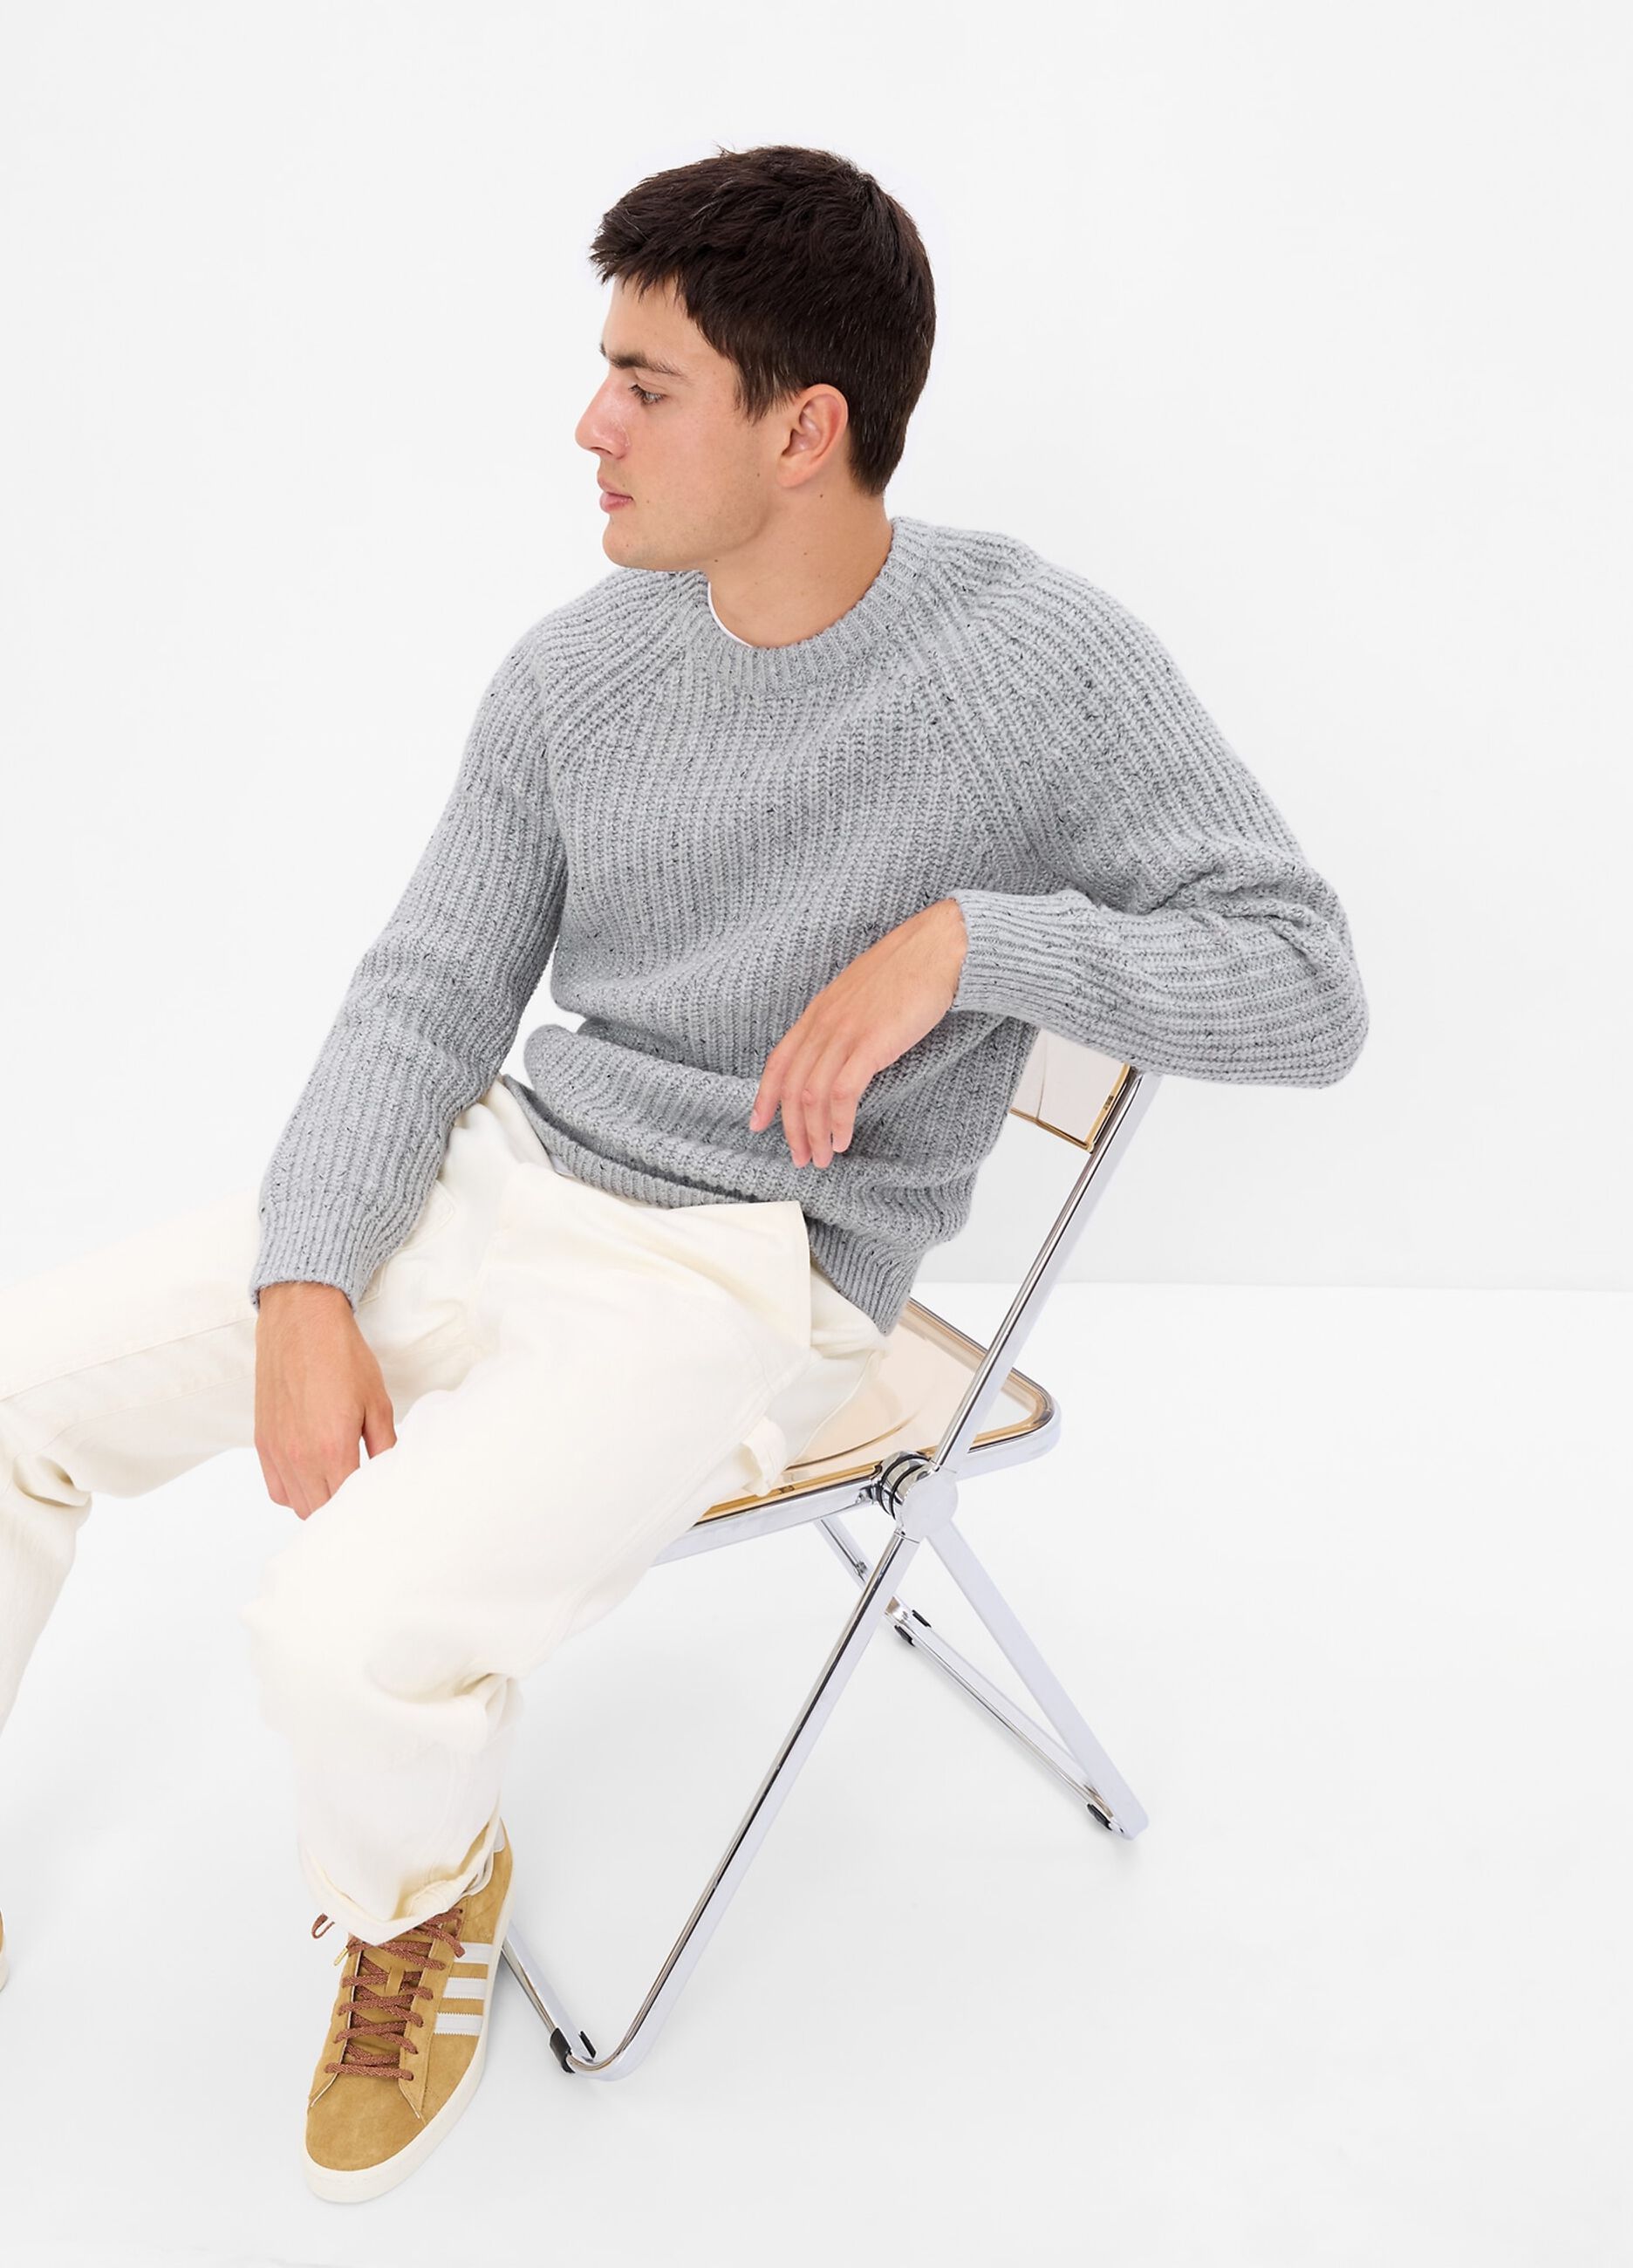 Mouliné-effect pullover with round neck